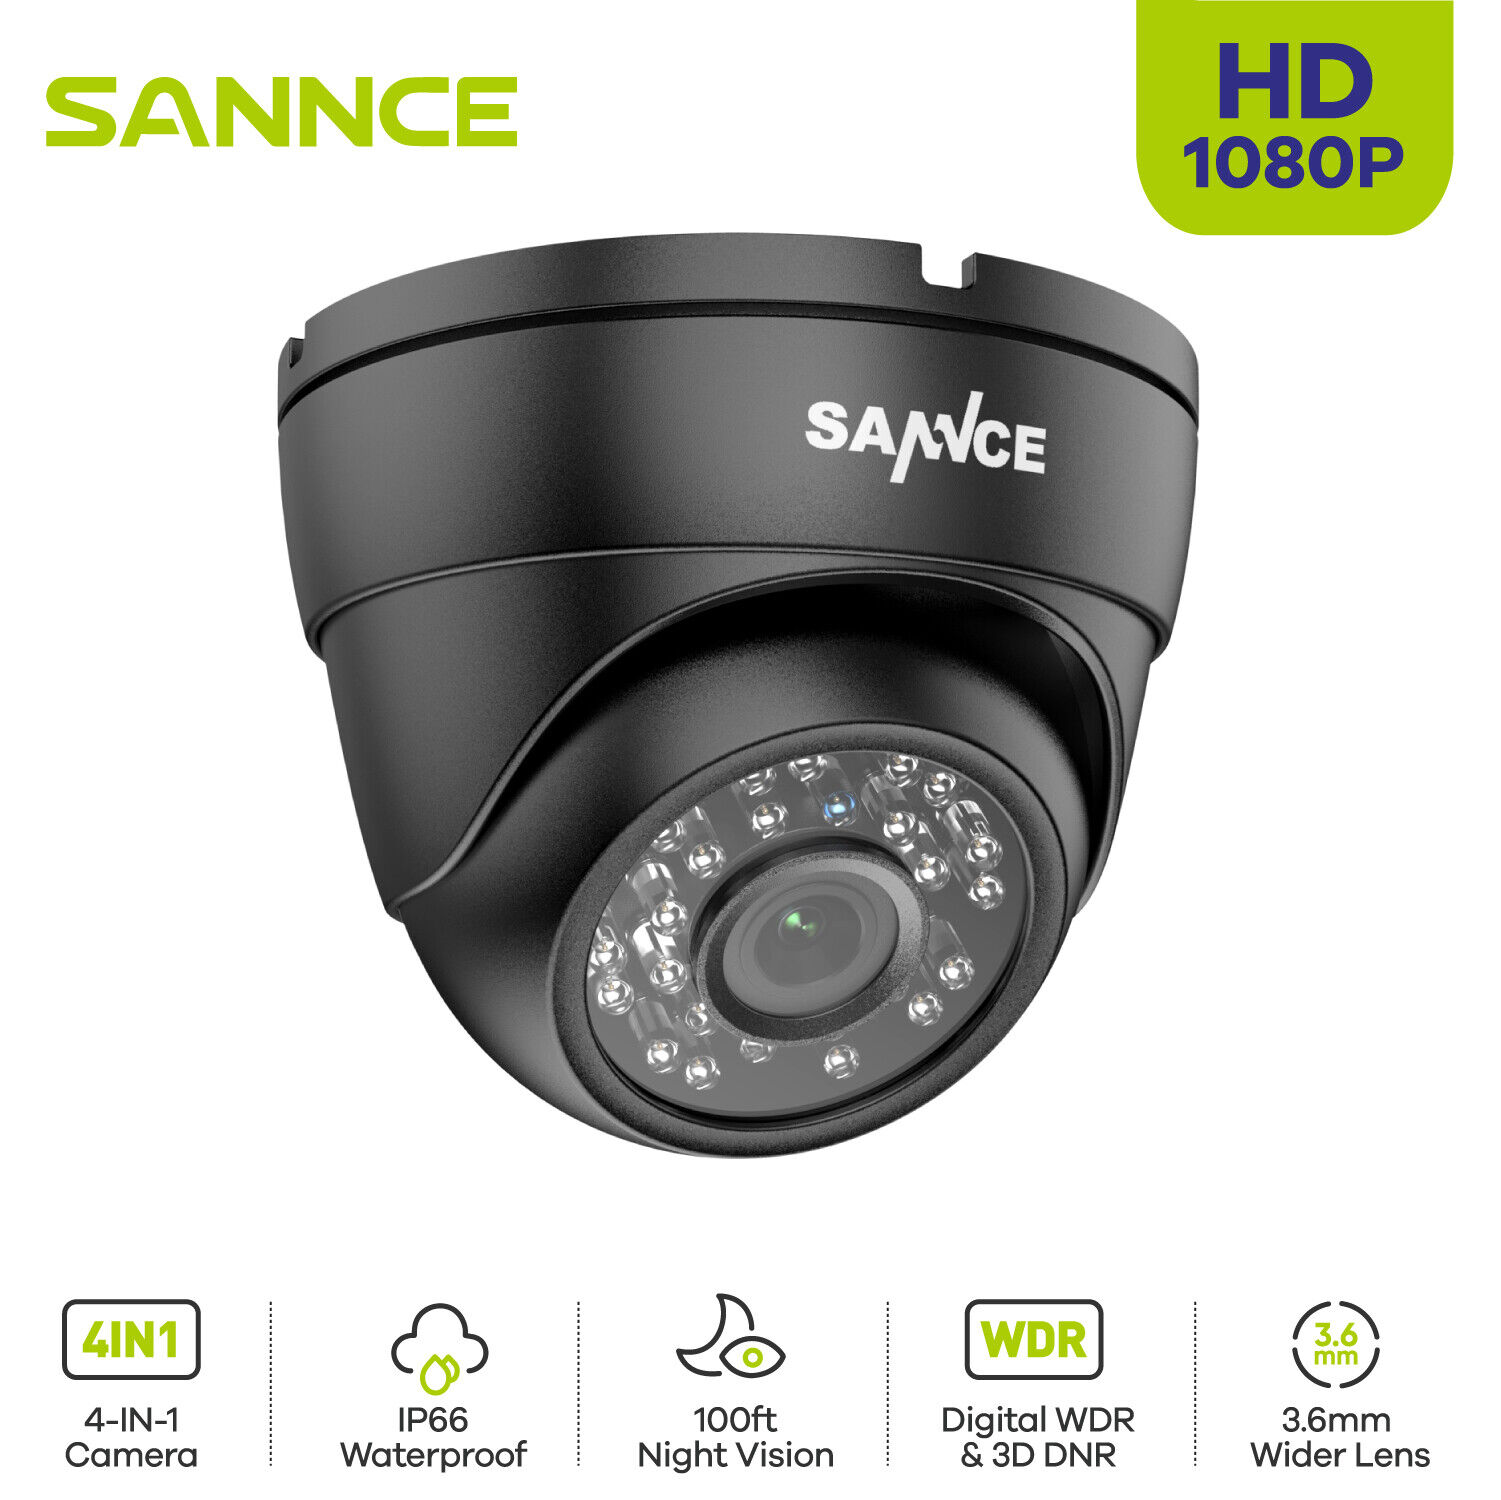 SANNCE Dome CCTV 4IN1 HD 1080p Camera 100ft IP66 IR for Home Surveillance System £30 post thumbnail image